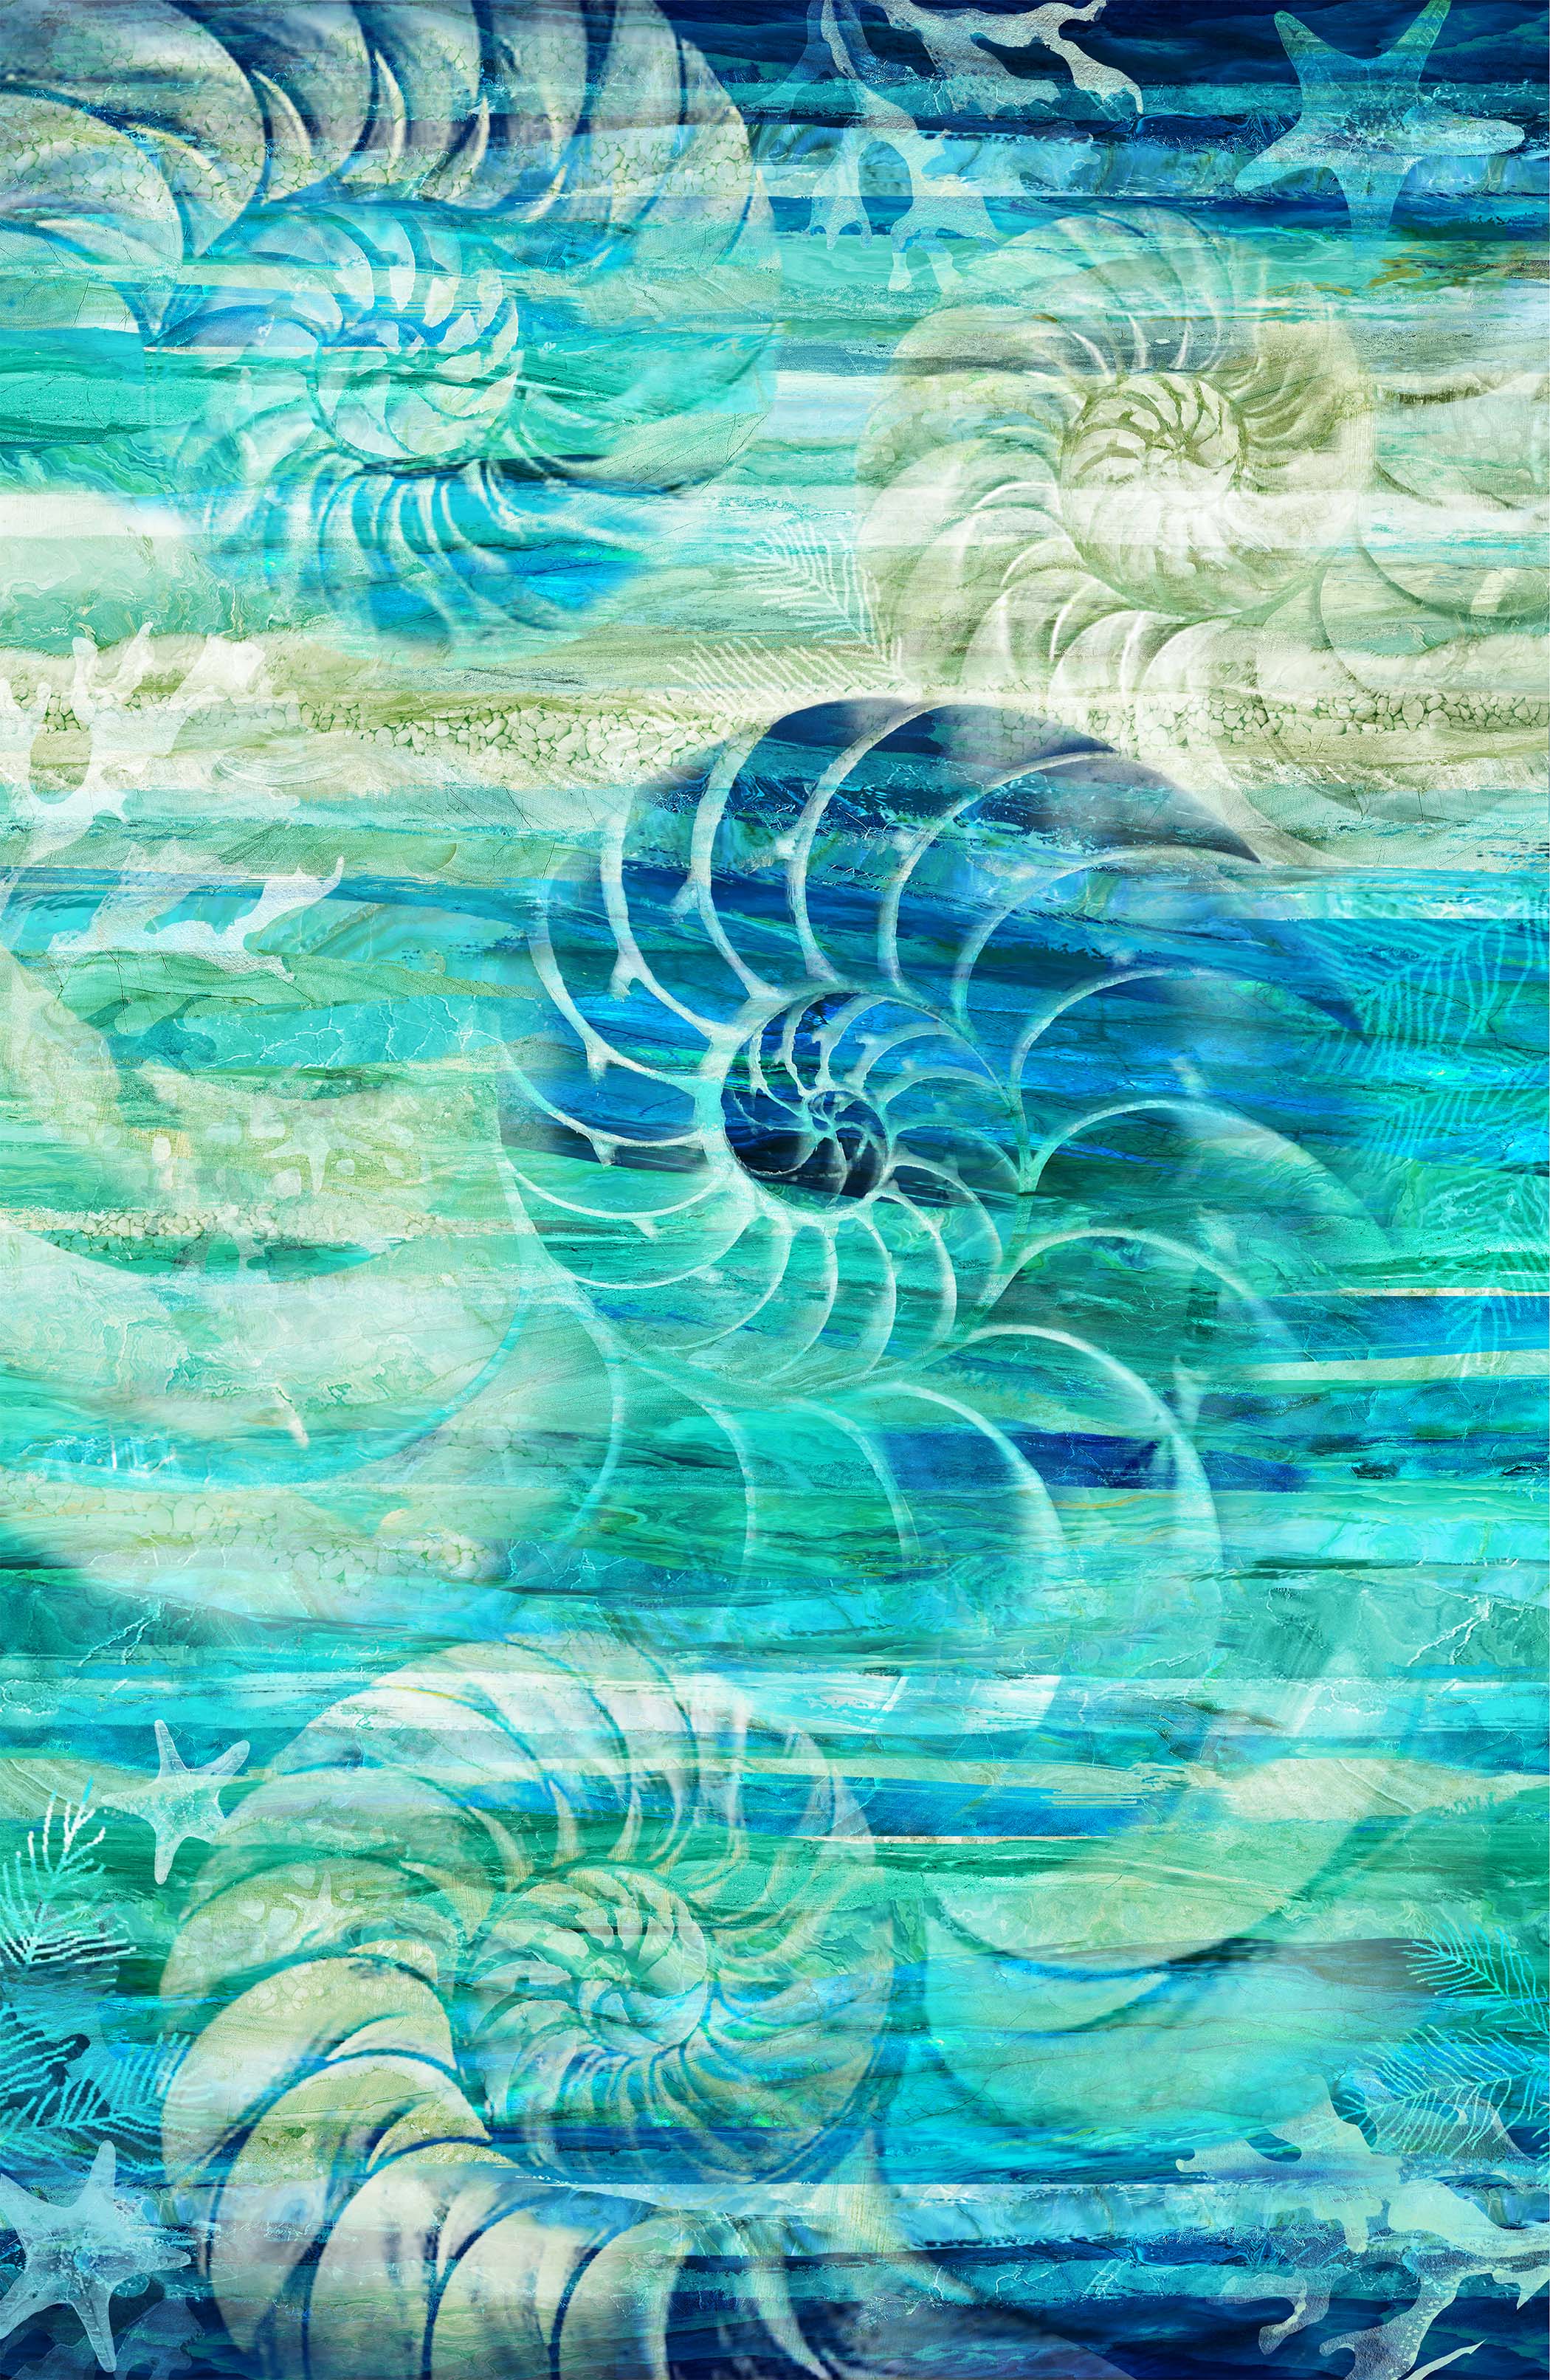 Vitamin Sea 100% Cotton Fabric from Northcott DP24516-66 - Panel 30 x 43 inches